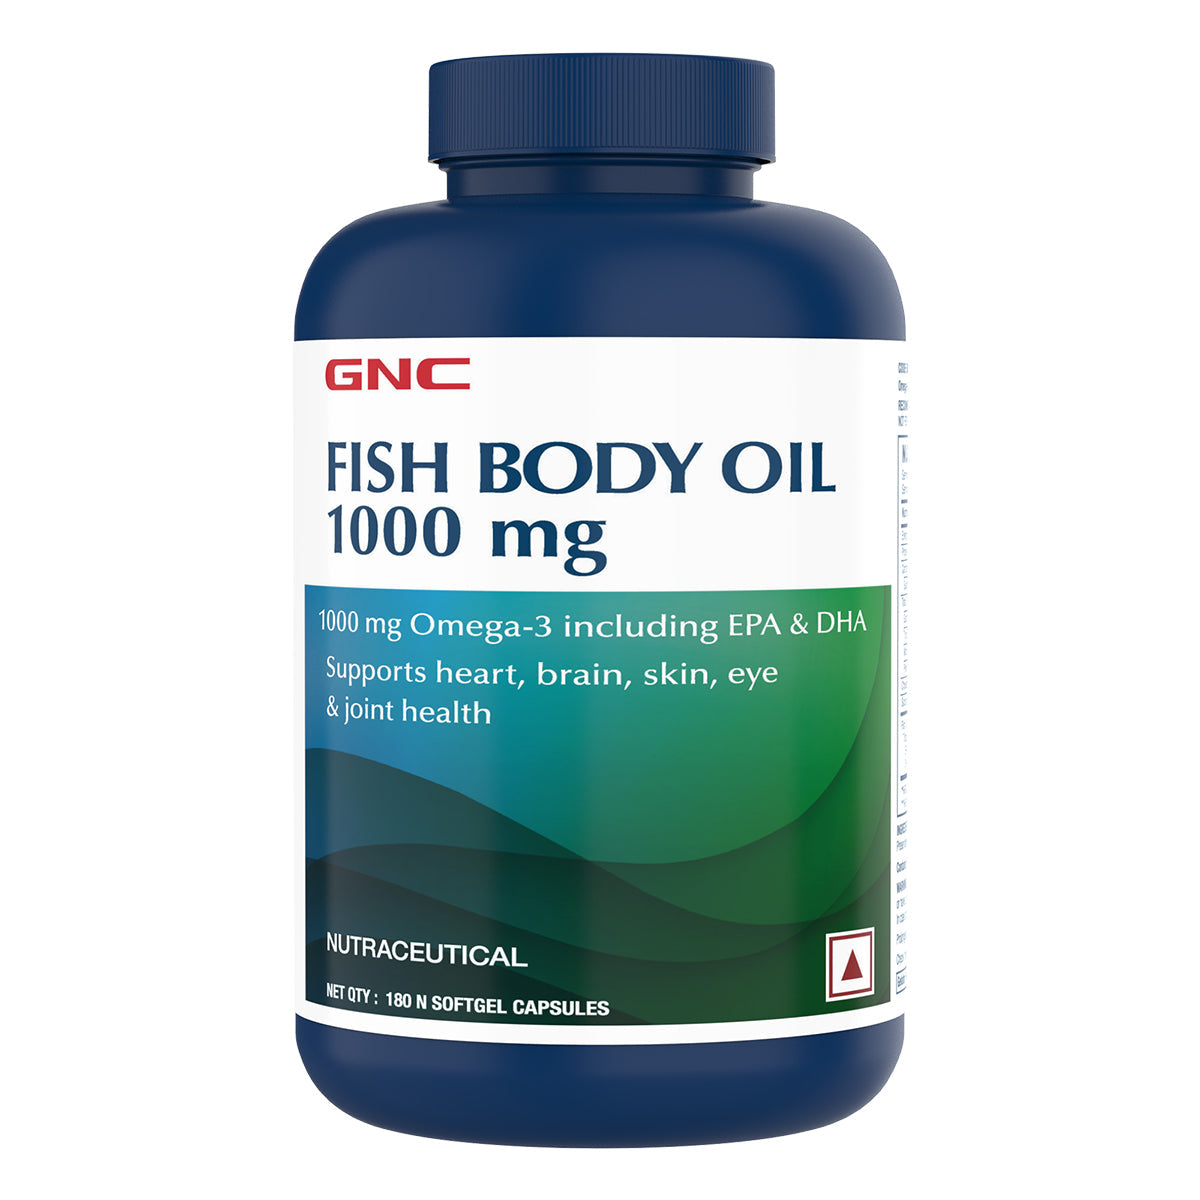 GNC Fish Oil - Omega 3 Capsules - 1000mg - Healthy Vision, Heart, Skin, Brain & Joints